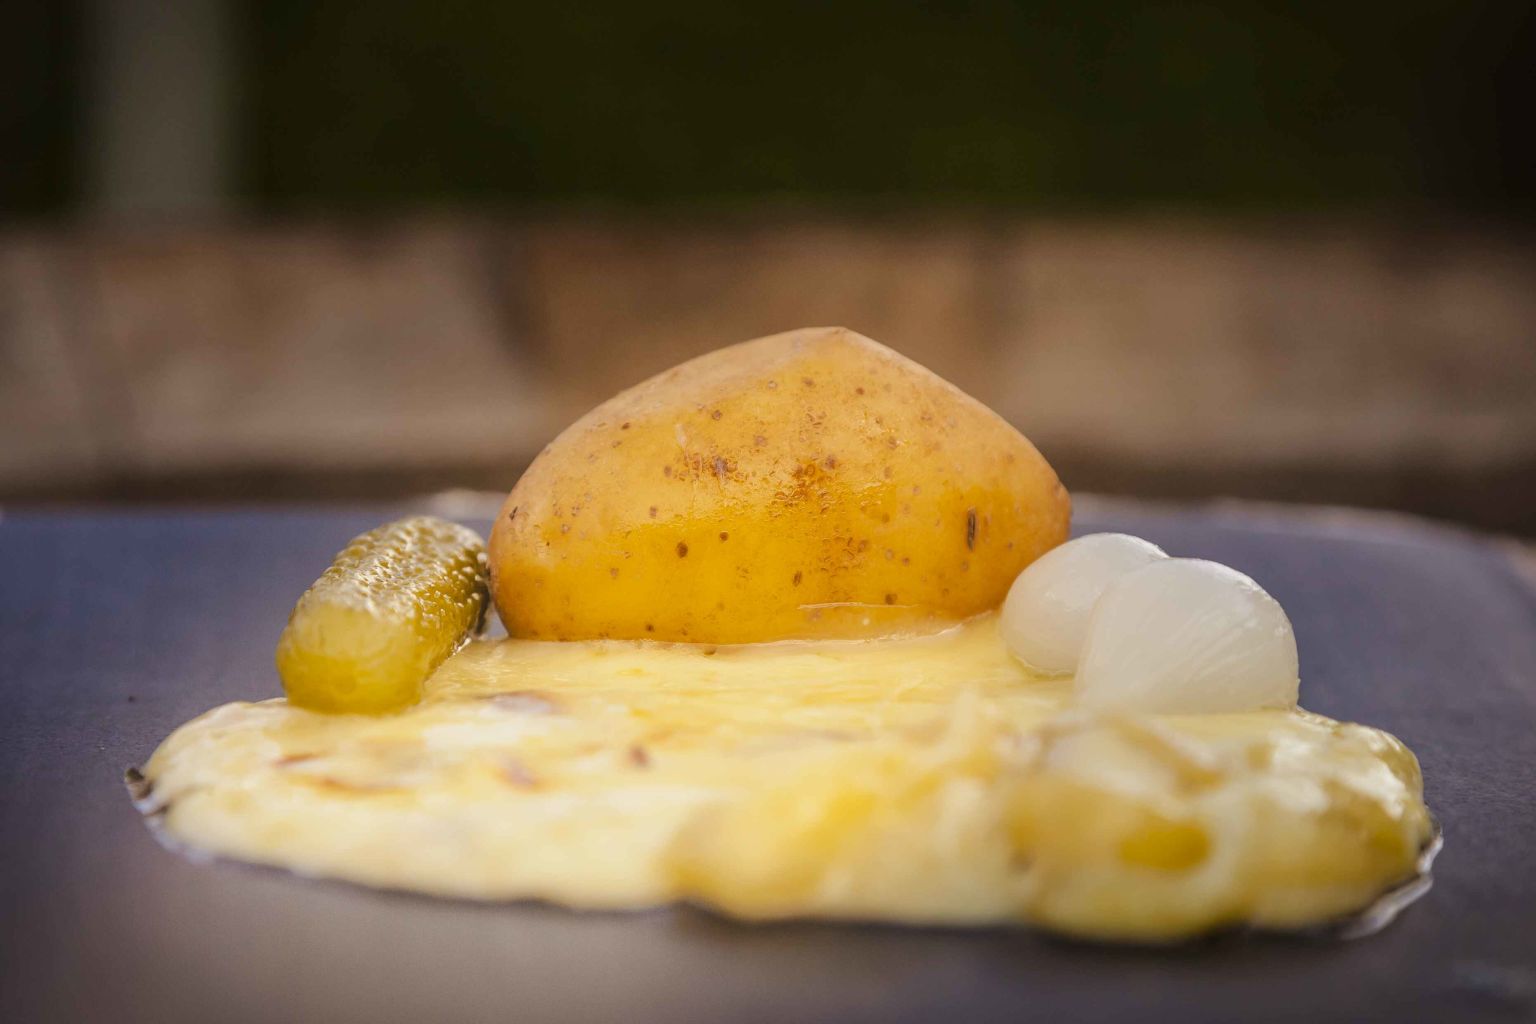 A raclette with a potato, onions and cornichons, Valais, Switzerland